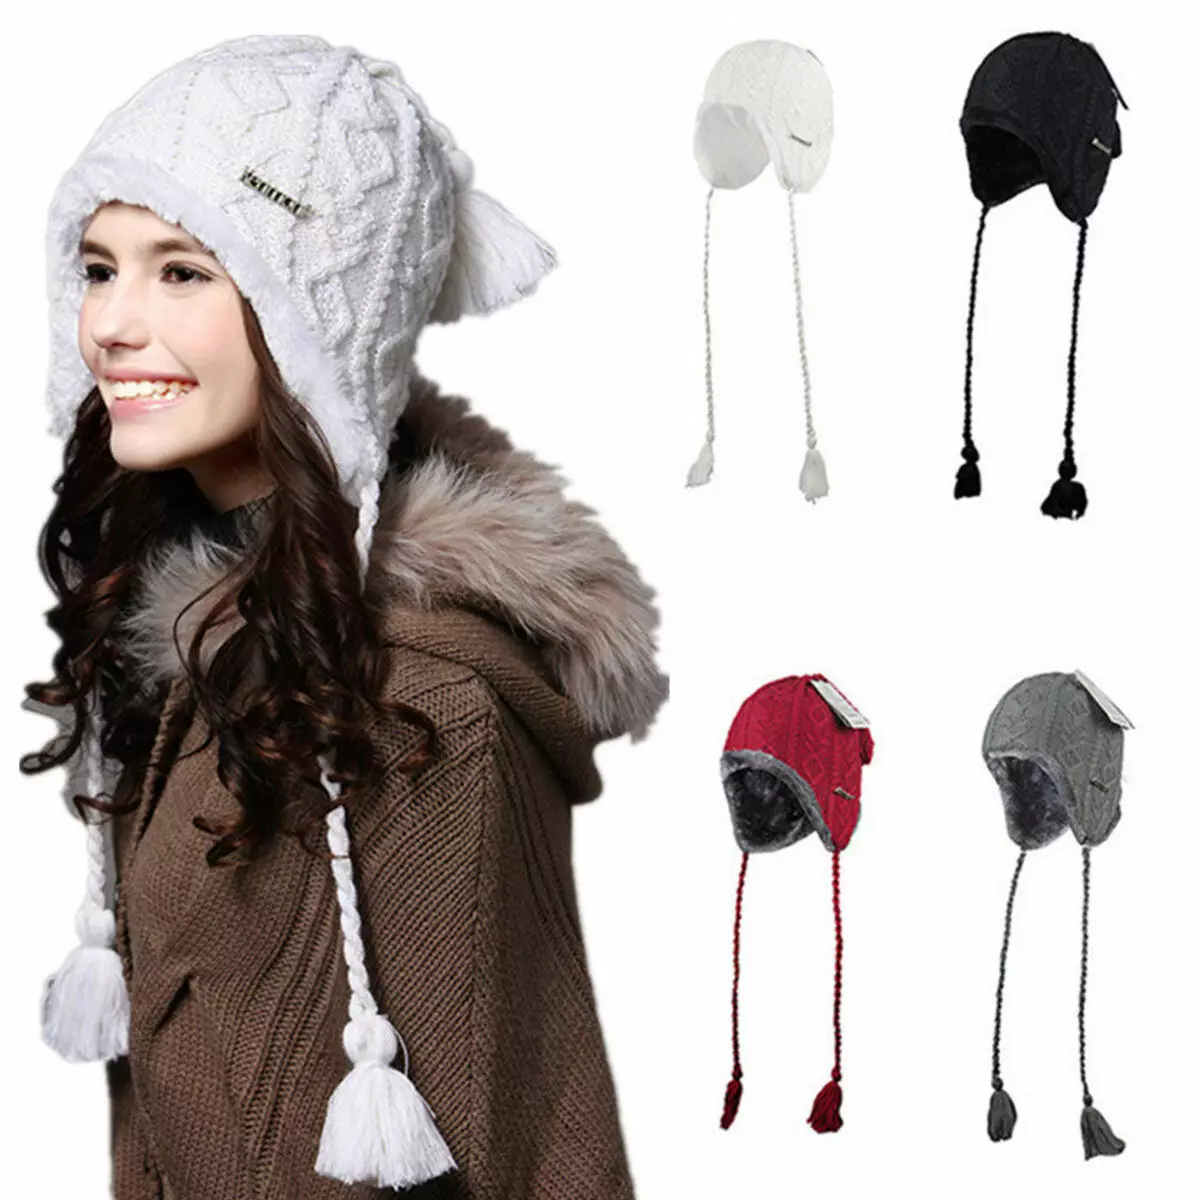 Sports caps (105 photos): Brand The North Face, Women's and Men's Knitted Models 2021, with Pompon, Fashion Hats of Ushanki 2966_21